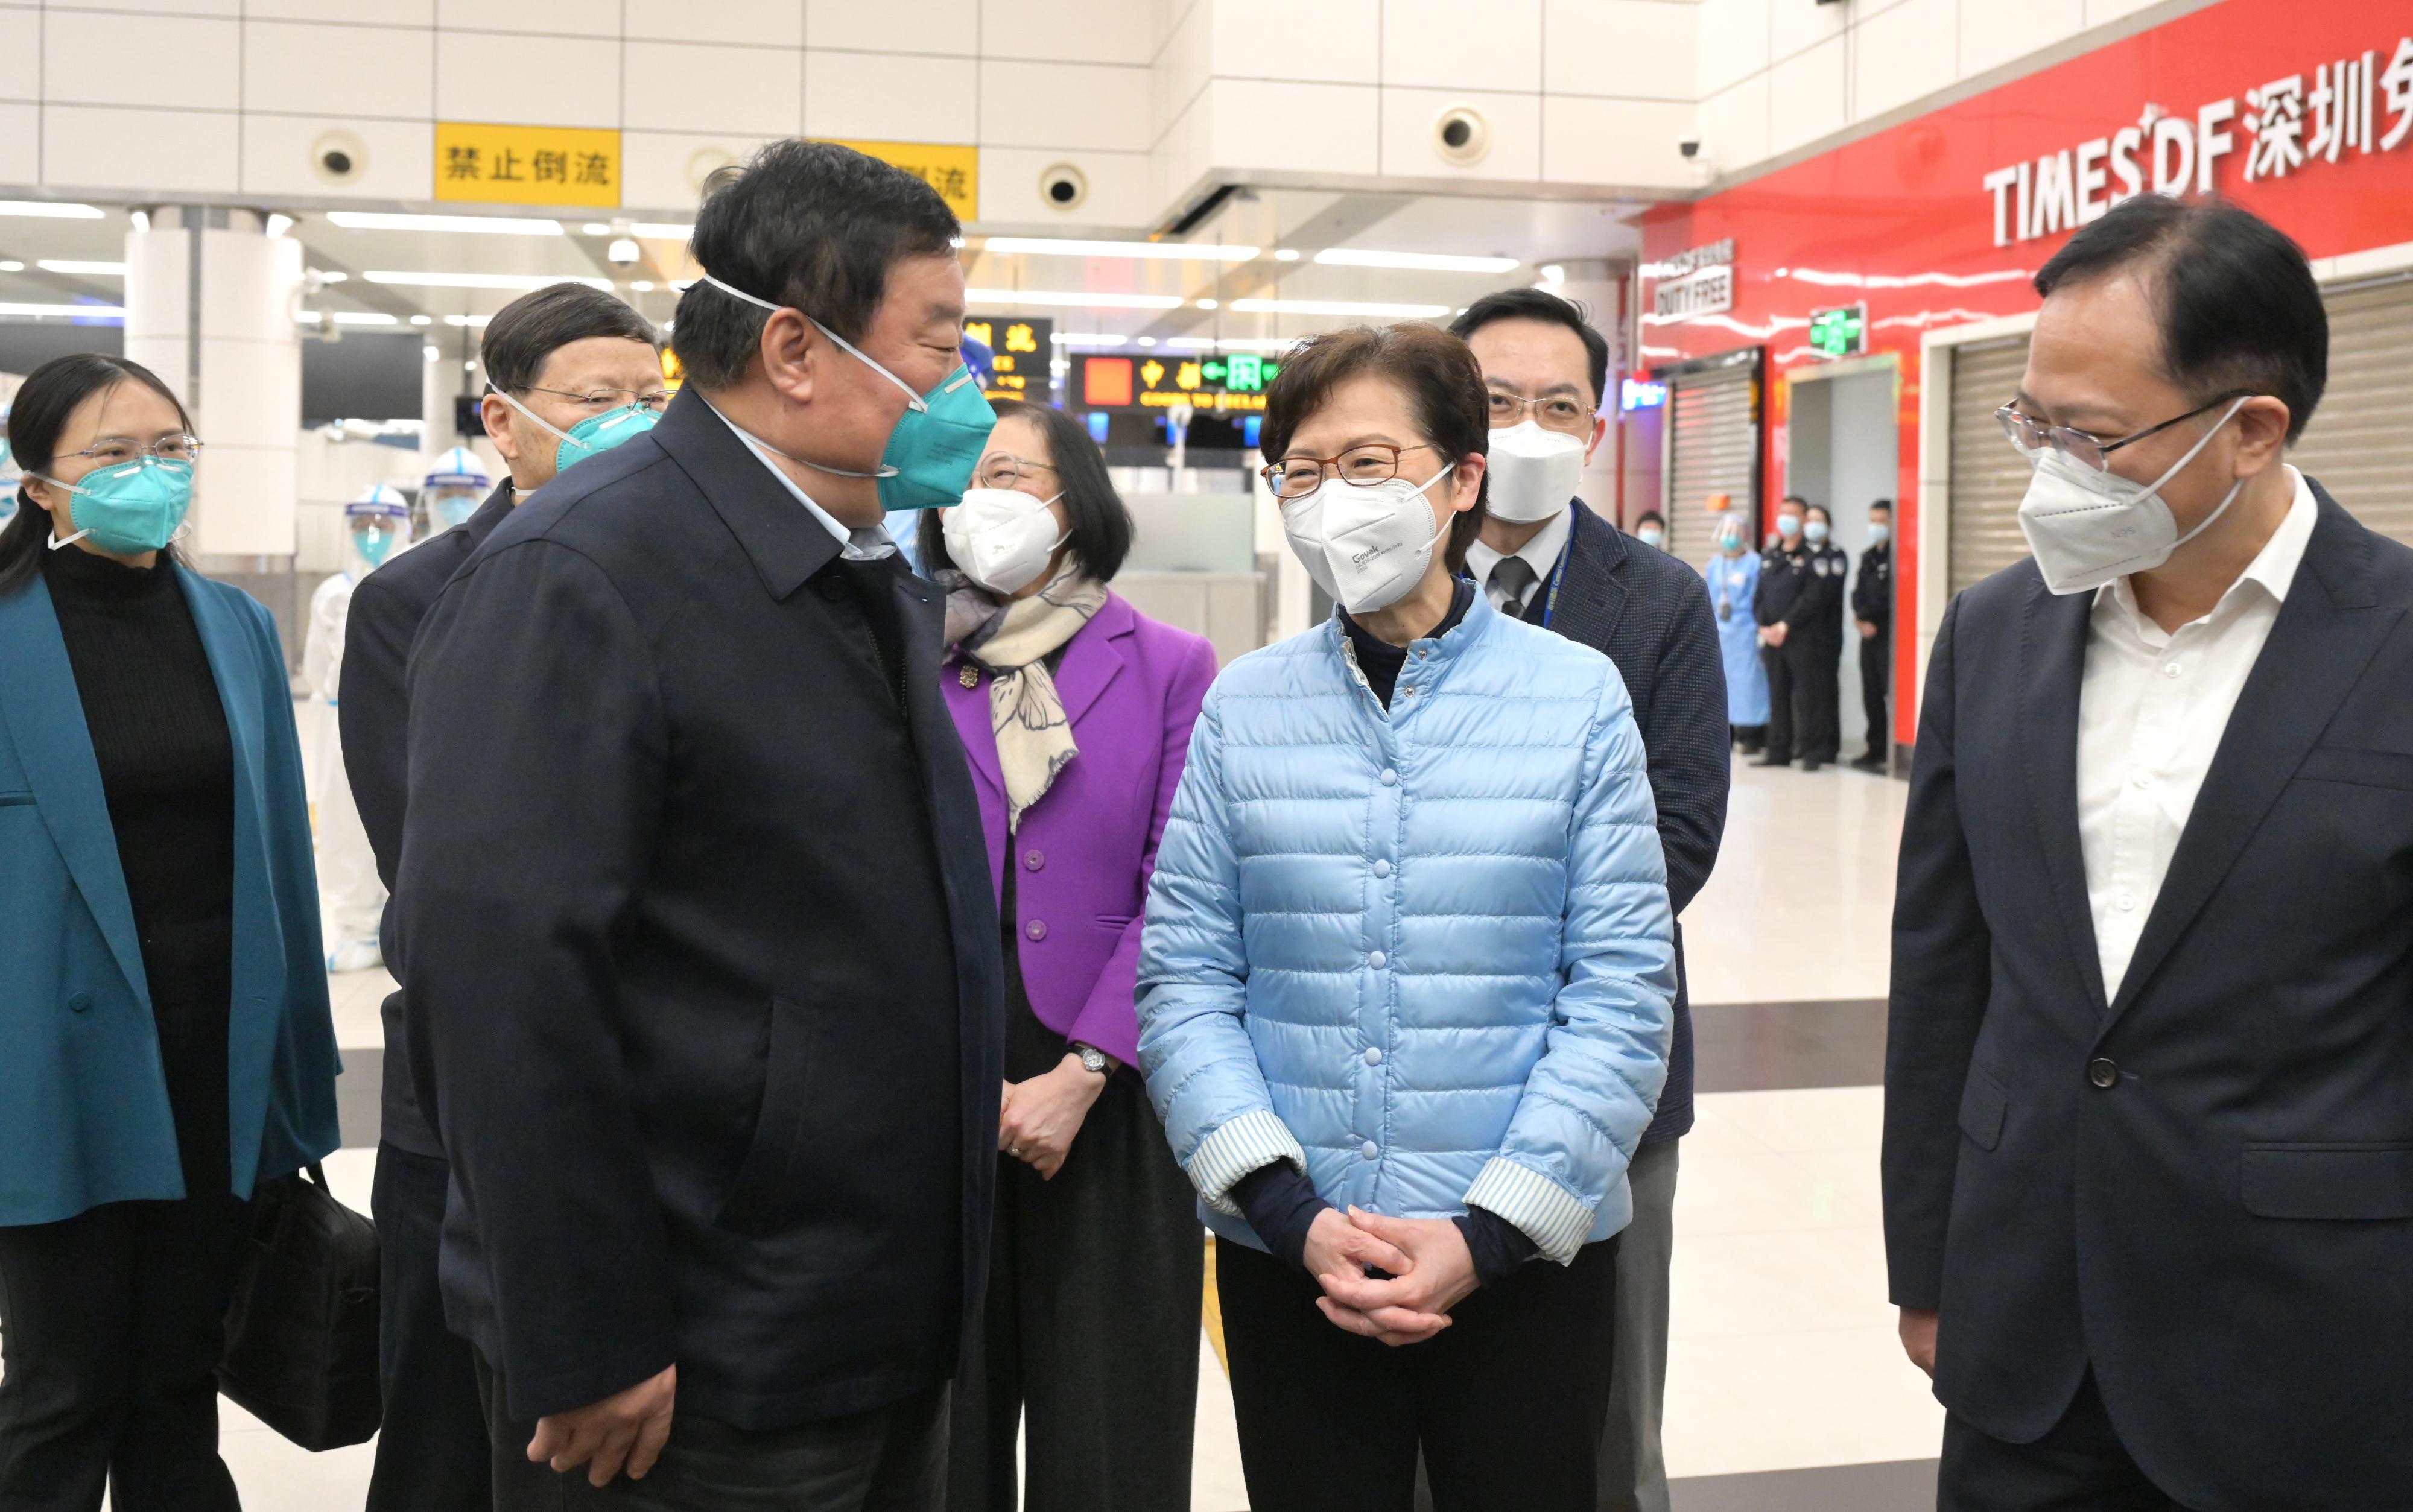 The Chief Executive, Mrs Carrie Lam, today (February 28) welcomed the arrival of Mainland experts at the Shenzhen Bay Control Point. Photo shows Mrs Lam (second right) talking with the Head of the National Health Commission's COVID-19 leading task force, Professor Liang Wannian (second left).
